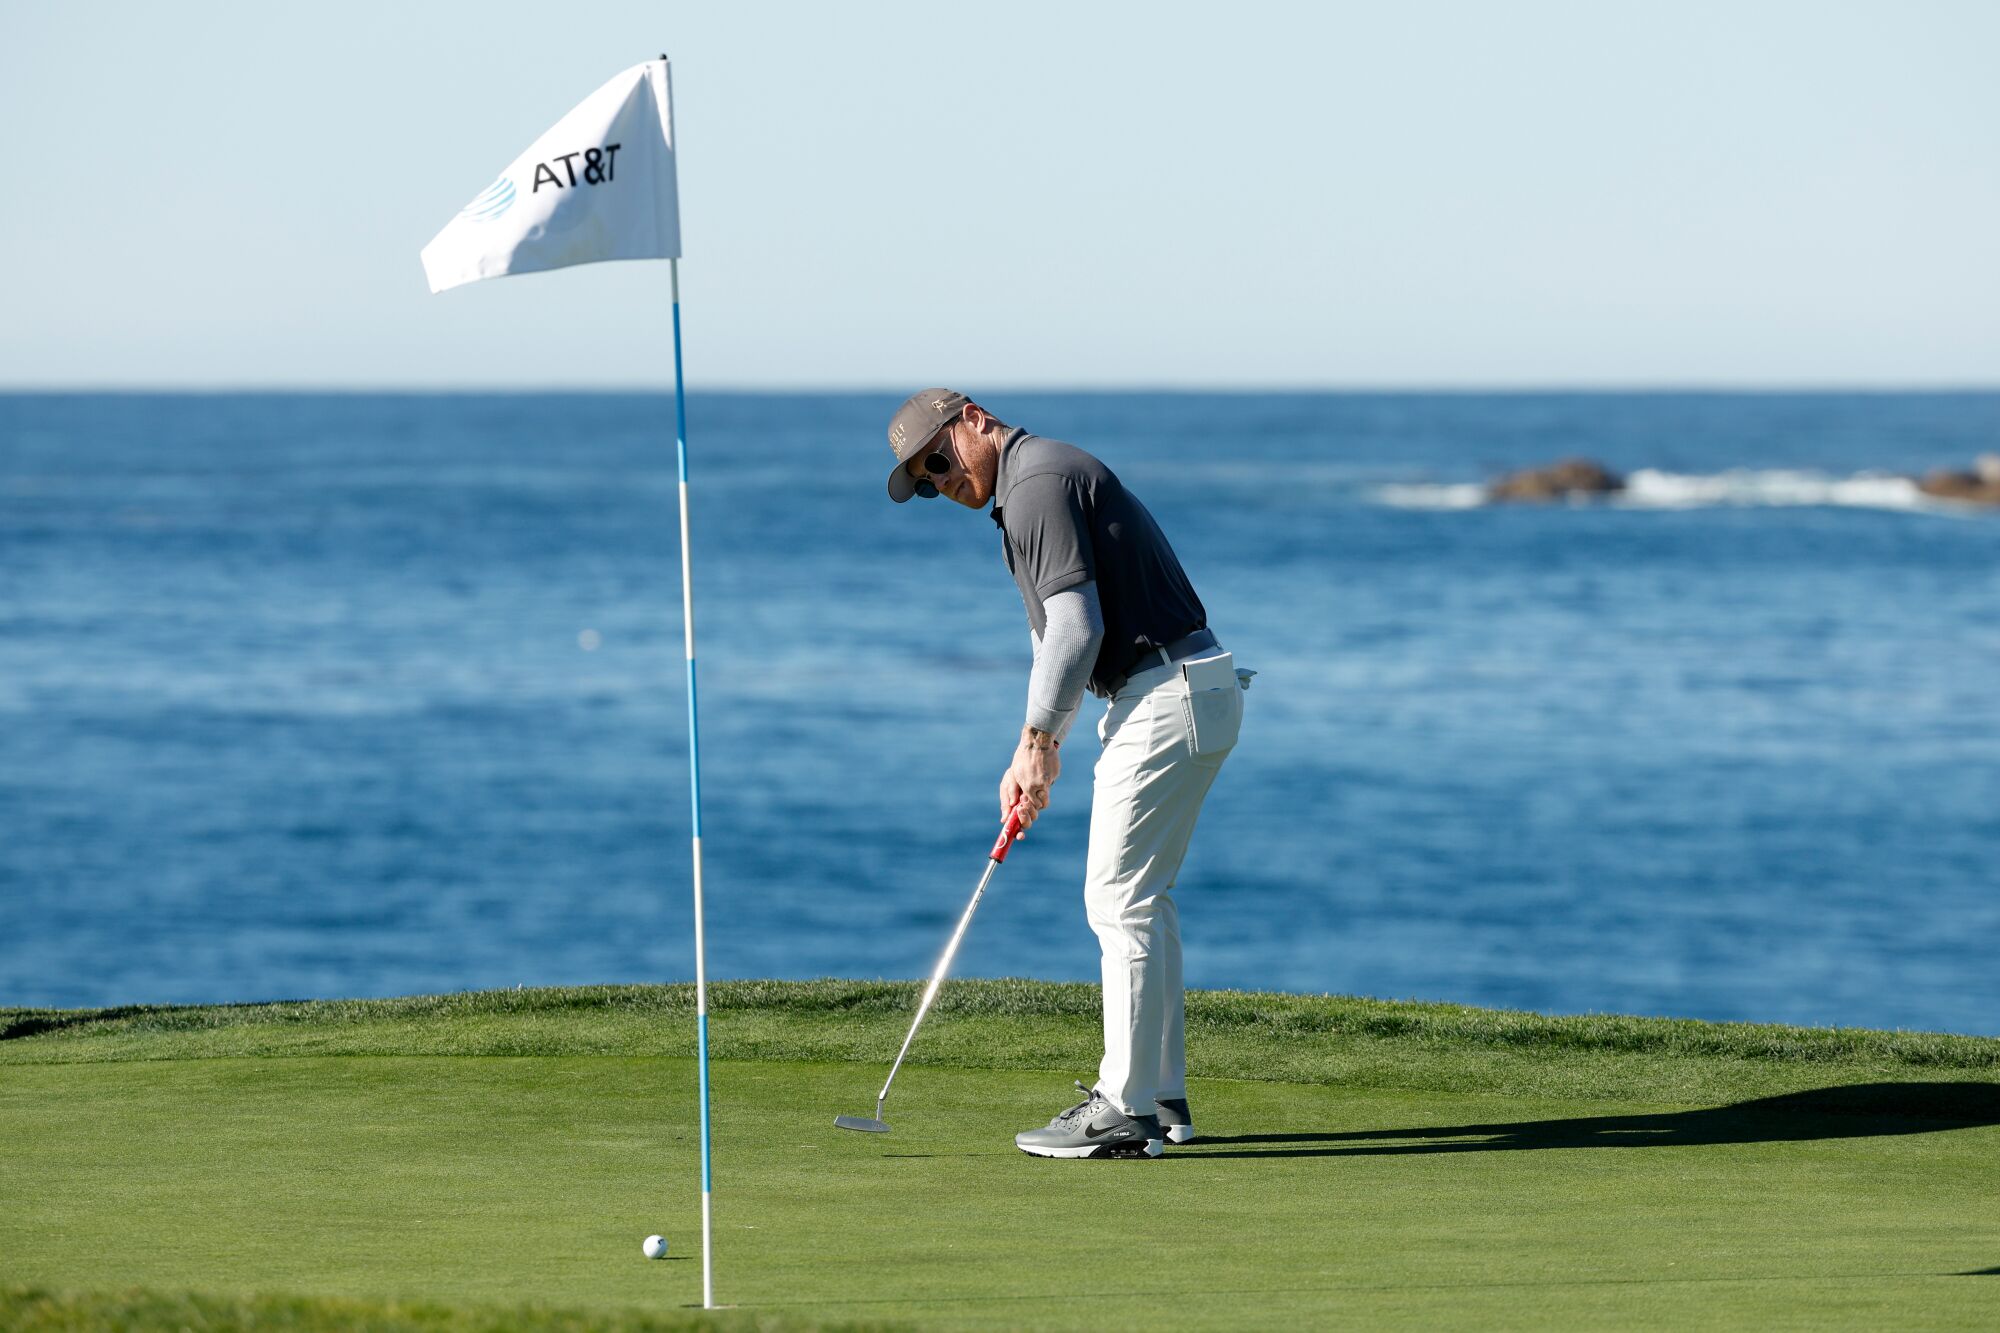 Saul "Canelo" Álvarez putts on the seventh green during a Pebble Beach Pro-Am practice round at Pebble Beach Golf Links.